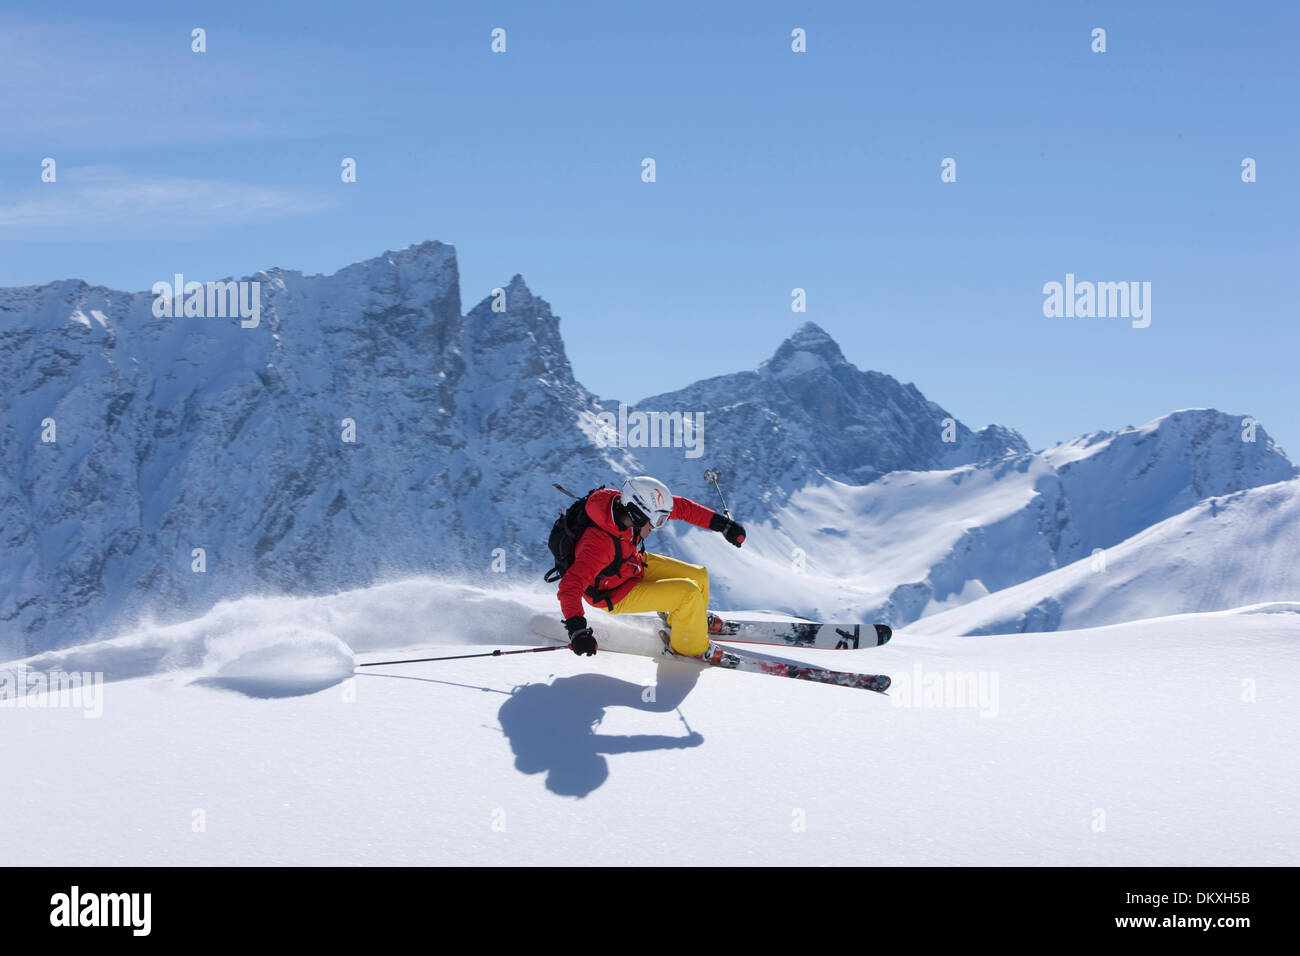 Switzerland Europe sport spare time adventure winter winter sports canton GR Graubünden Grisons ski skiing Carving Carving ski Stock Photo